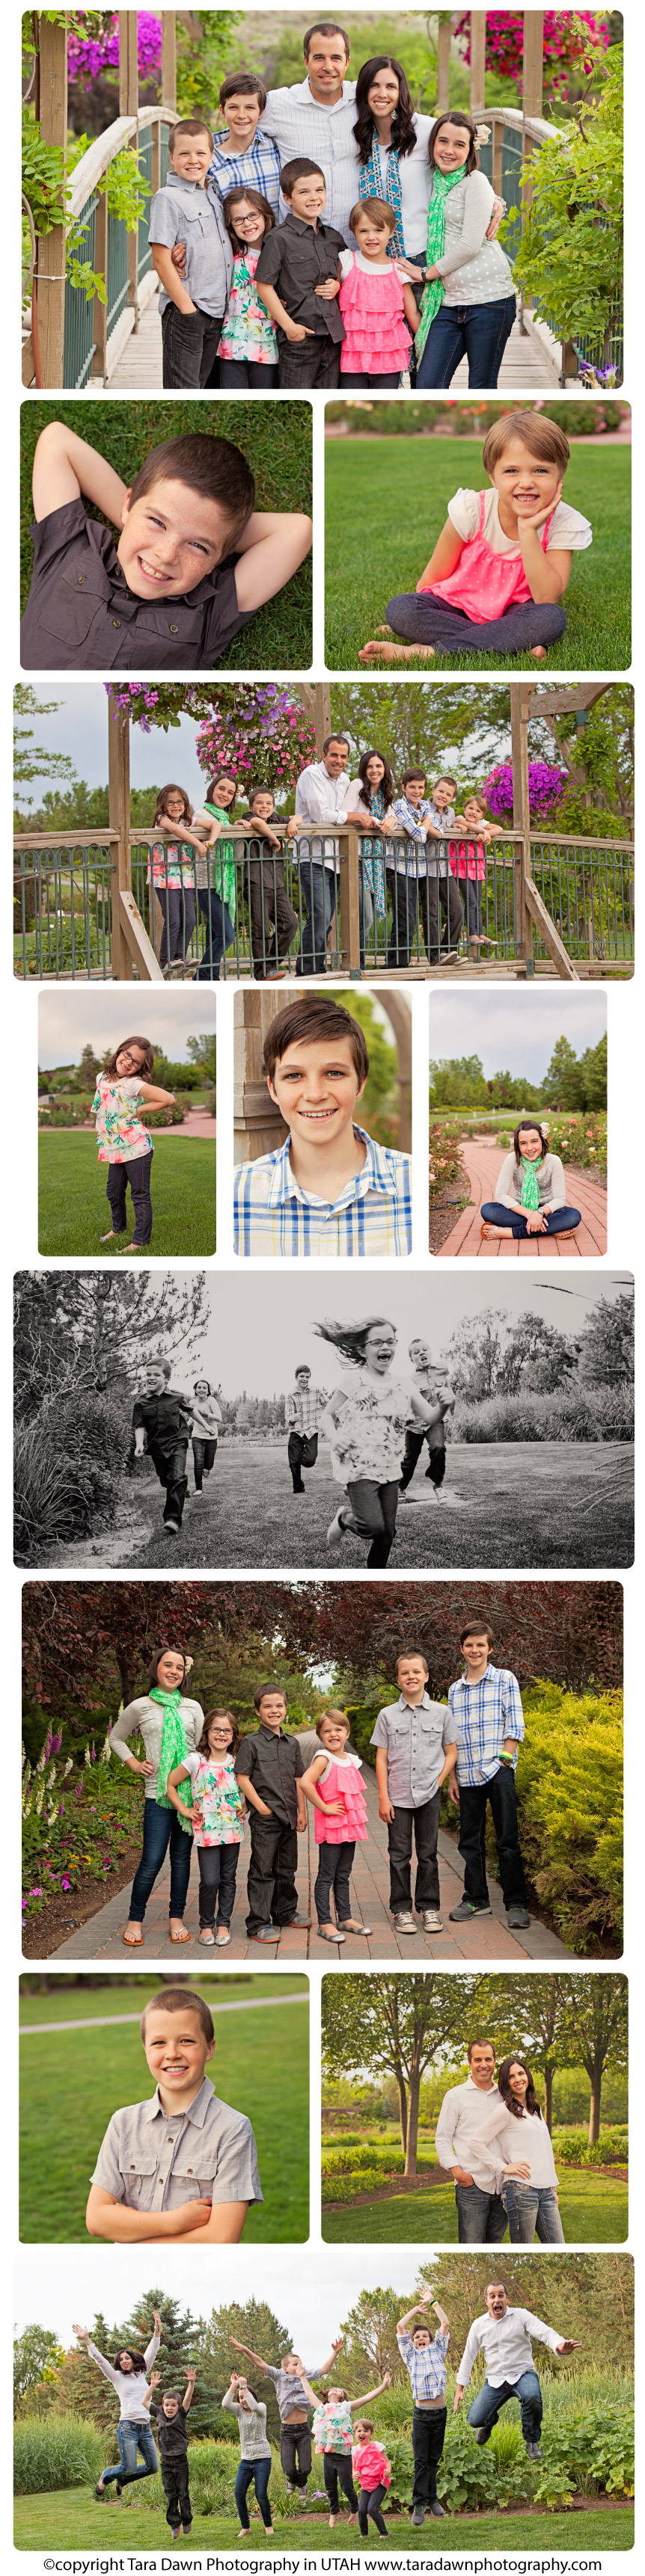 utah_family_outdoor_photography